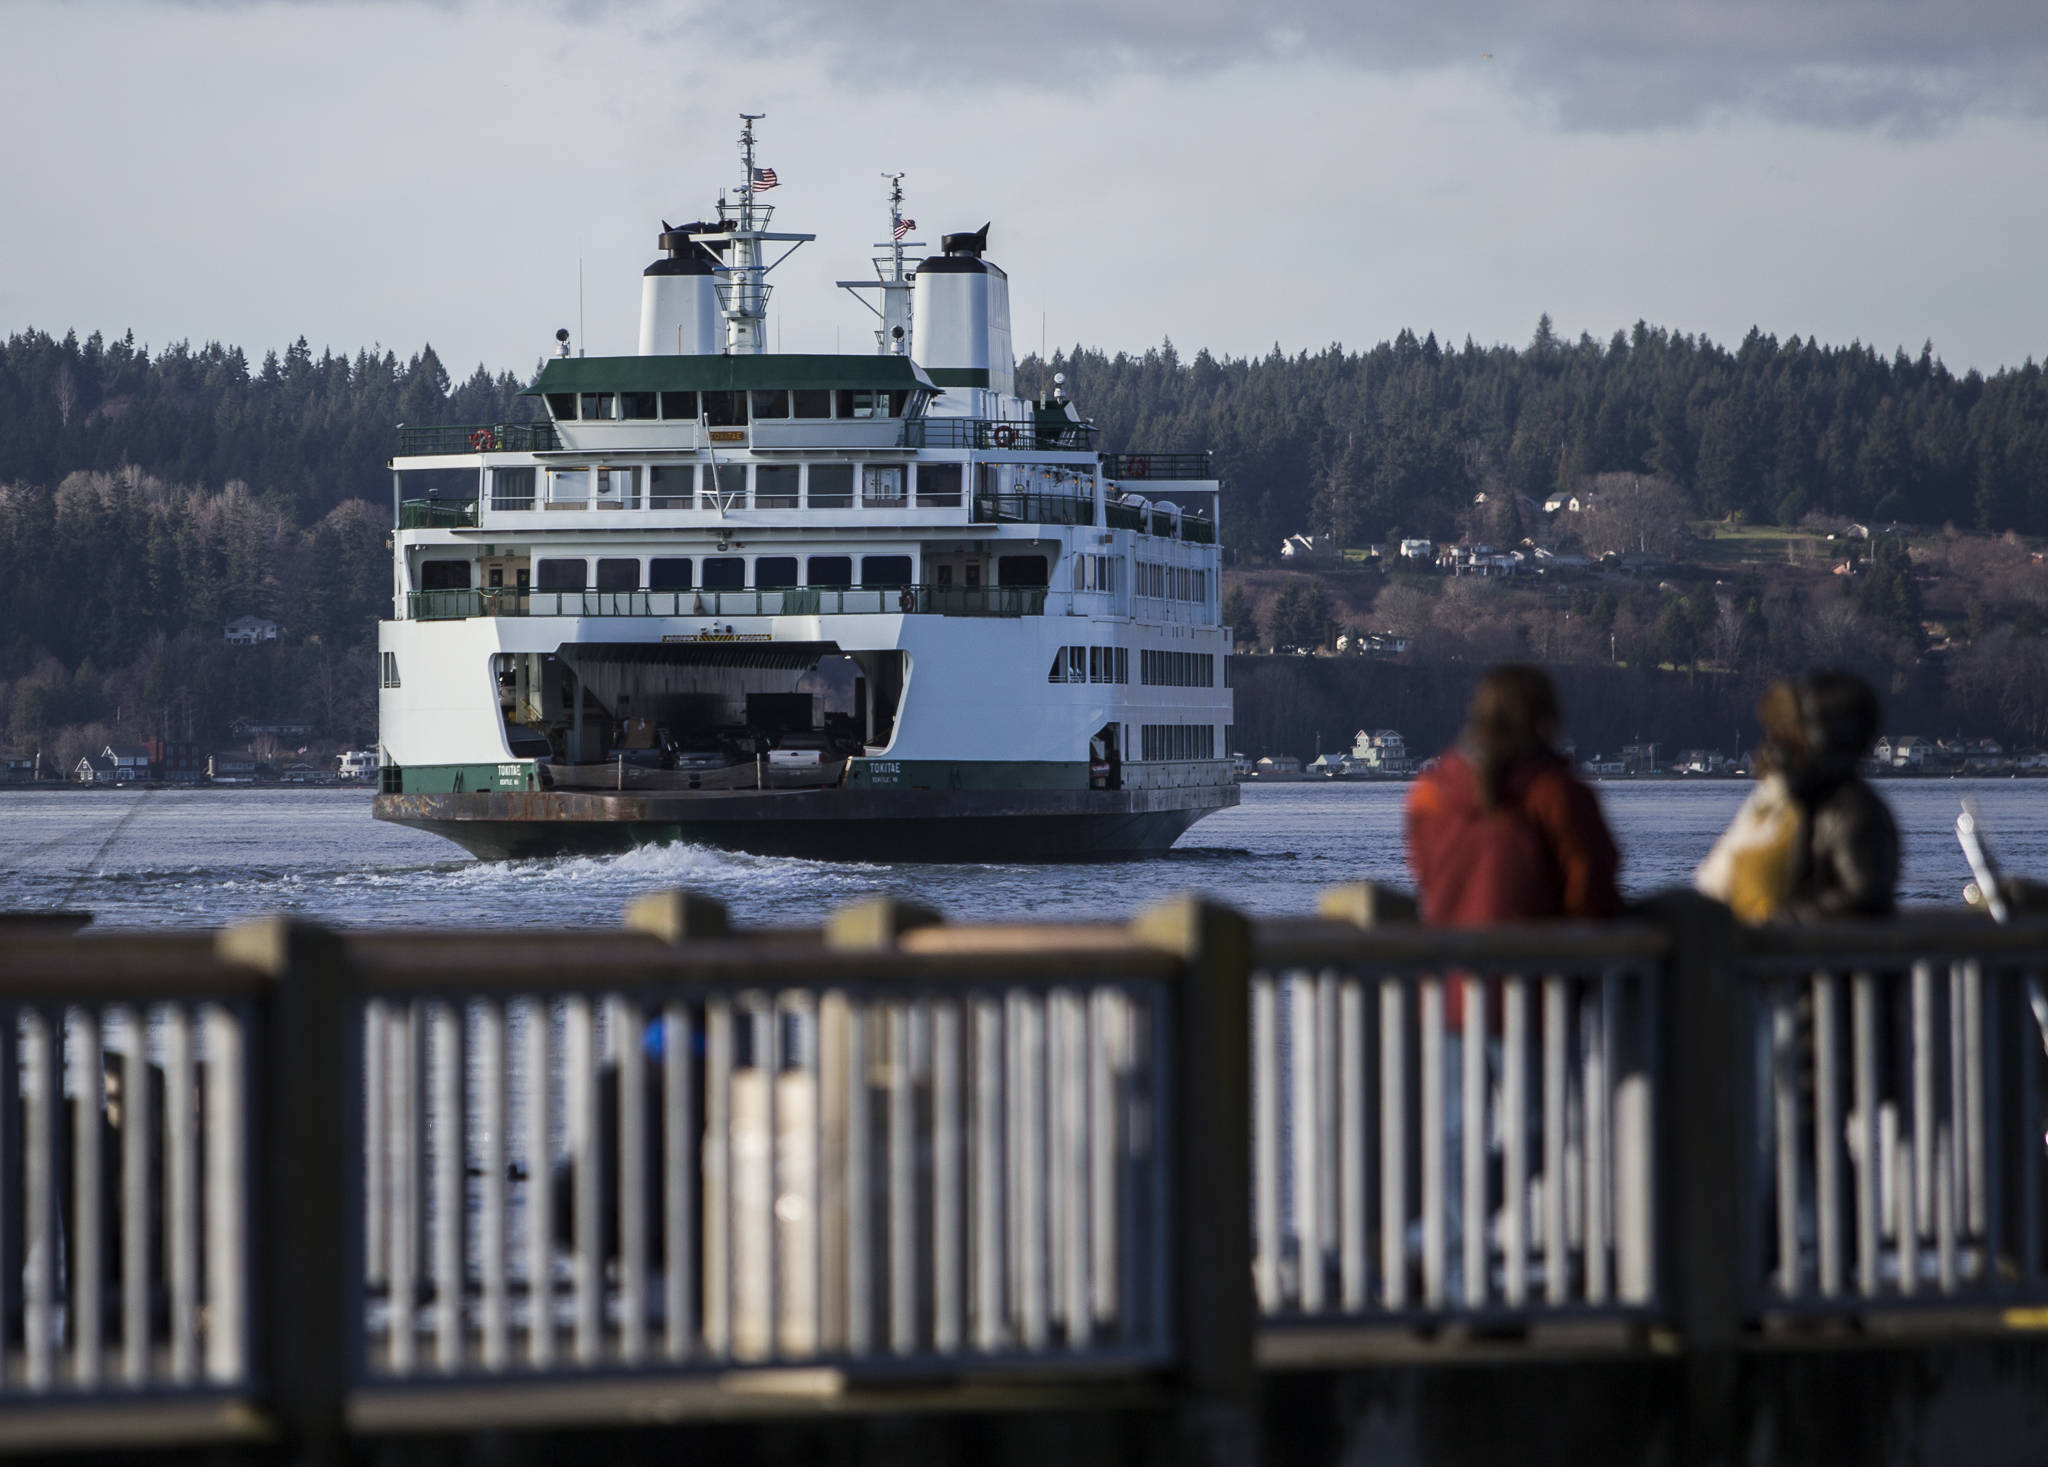 A ferry leaves the Mukilteo terminal on Tuesday. Washington State Ferries is asking people to limit travel this year. (Olivia Vanni / The Herald)